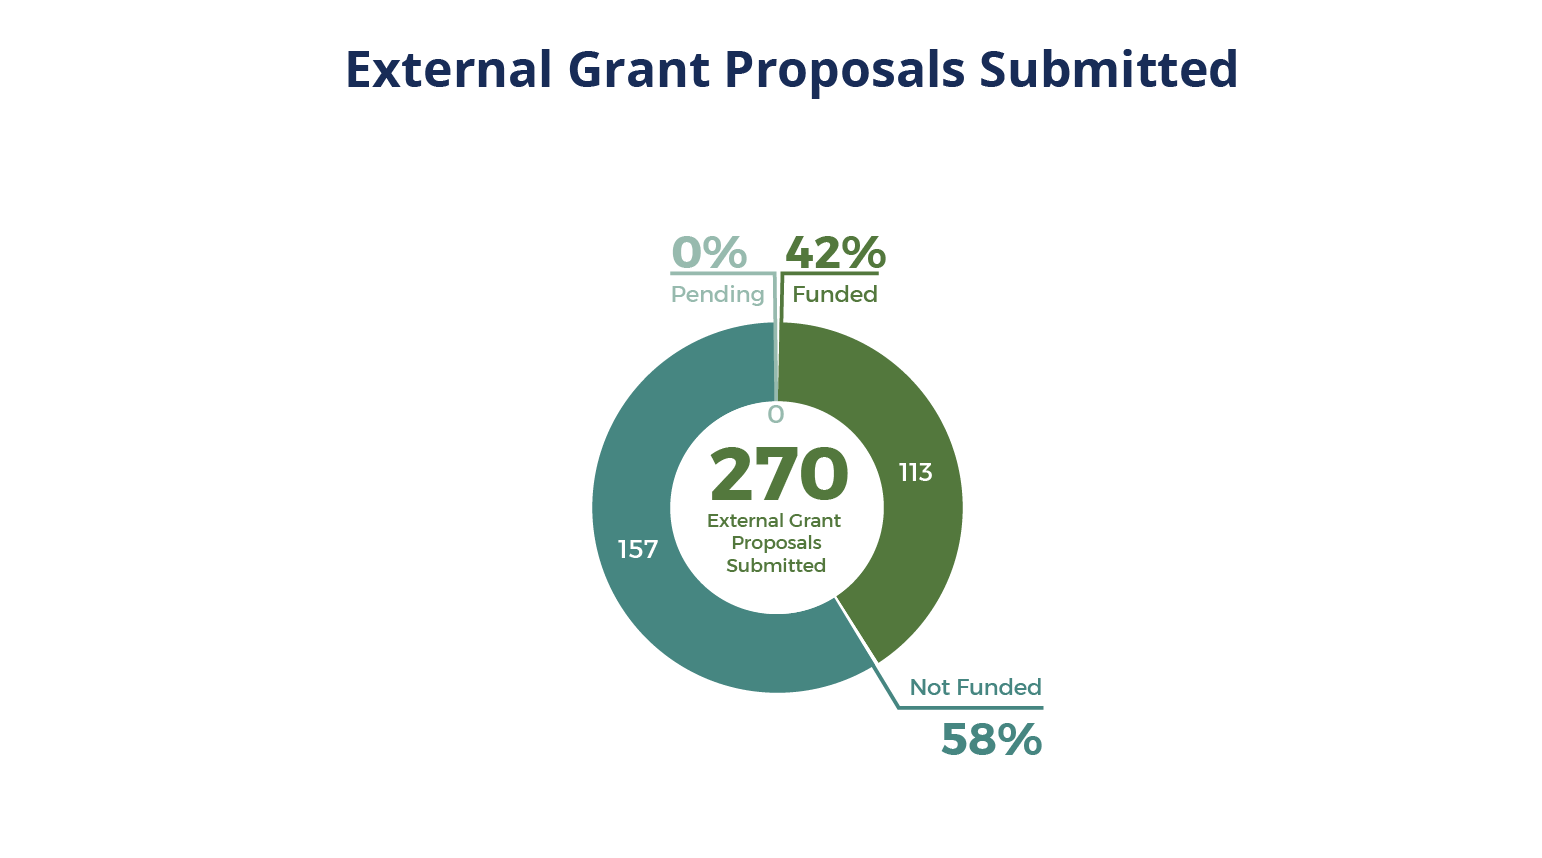 Pie chart of External Grant Proposals Submitted.